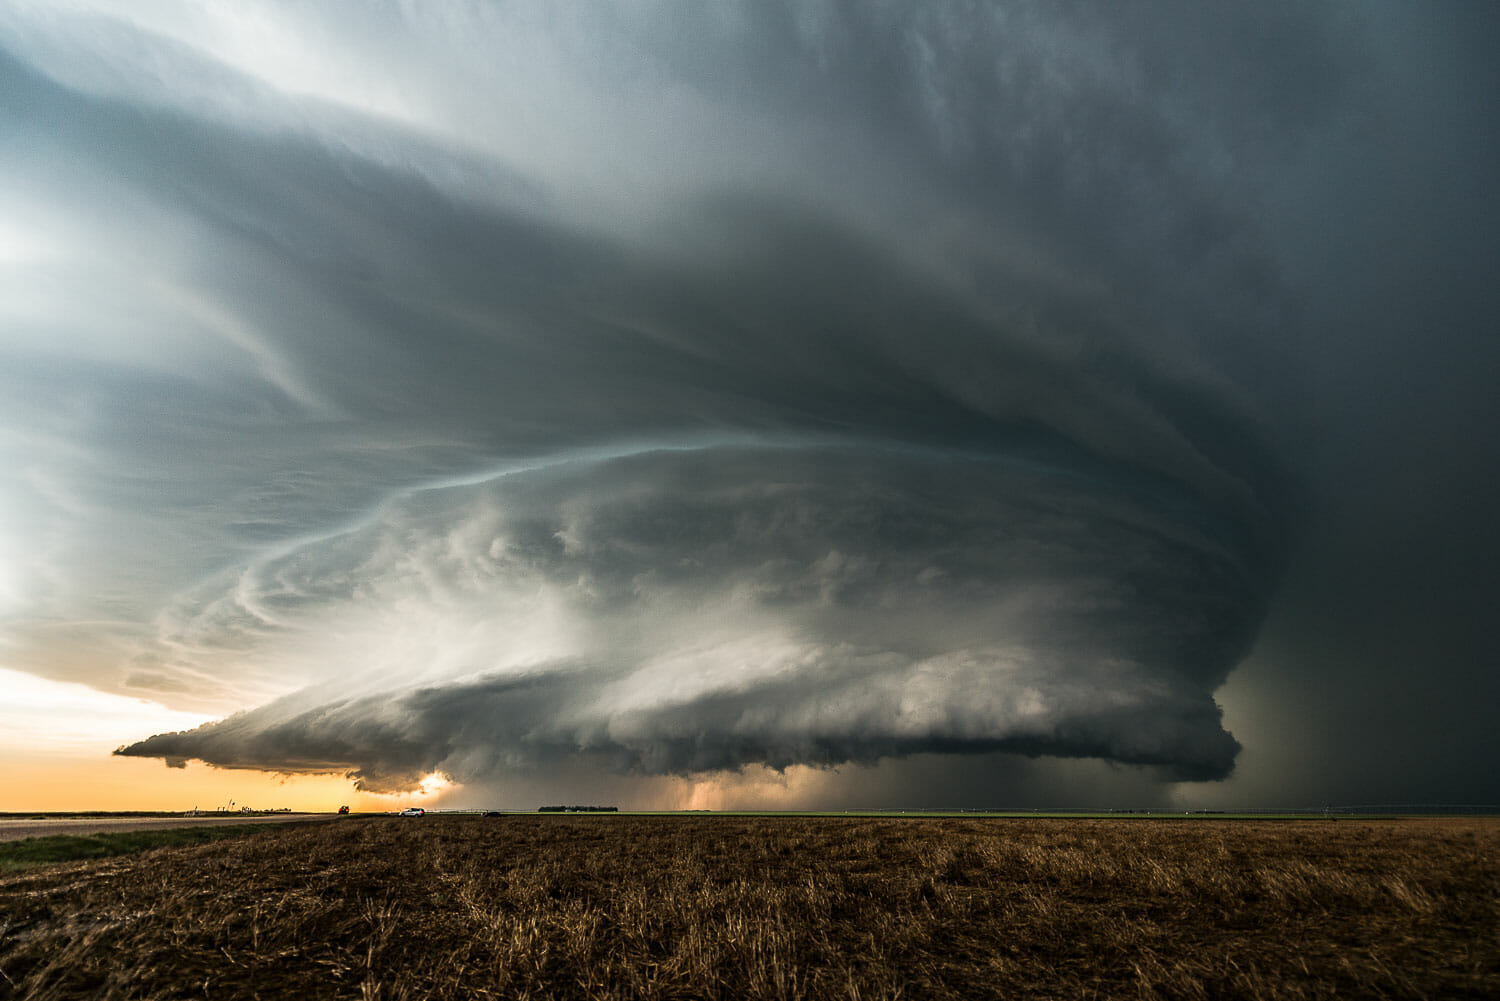 How to Photograph Storms: Tips for Beginners